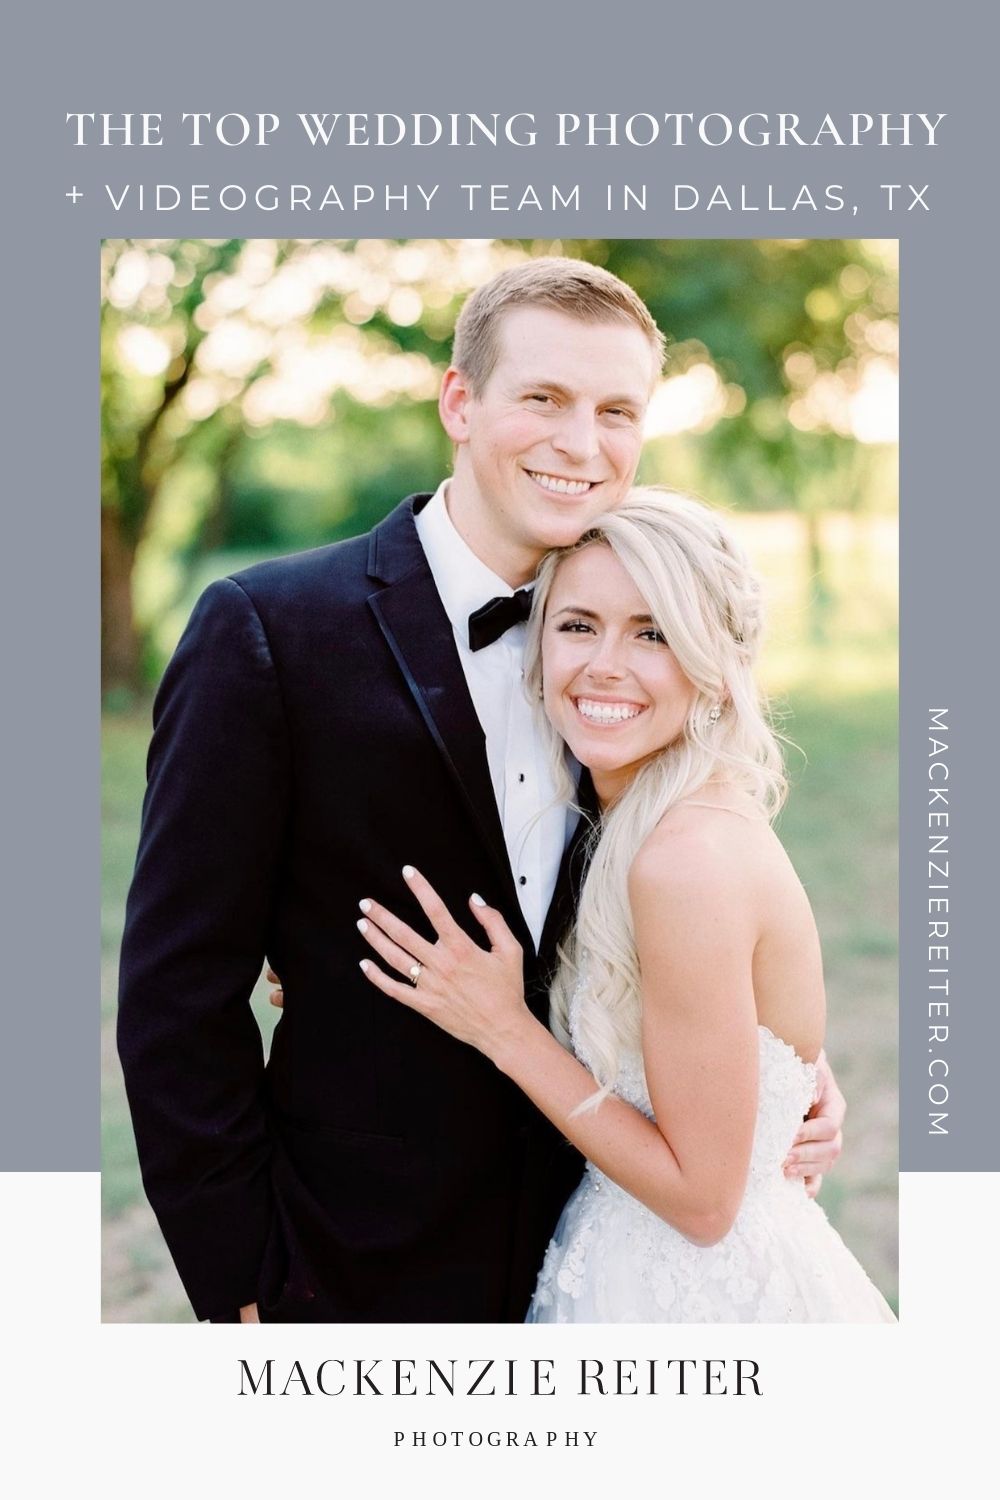 Mackenzie Reiter posing for a portrait photo with her husband during their wedding shoot; image overlaid with text that reads The Top Wedding Photography + Videography Team in Dallas, Texas